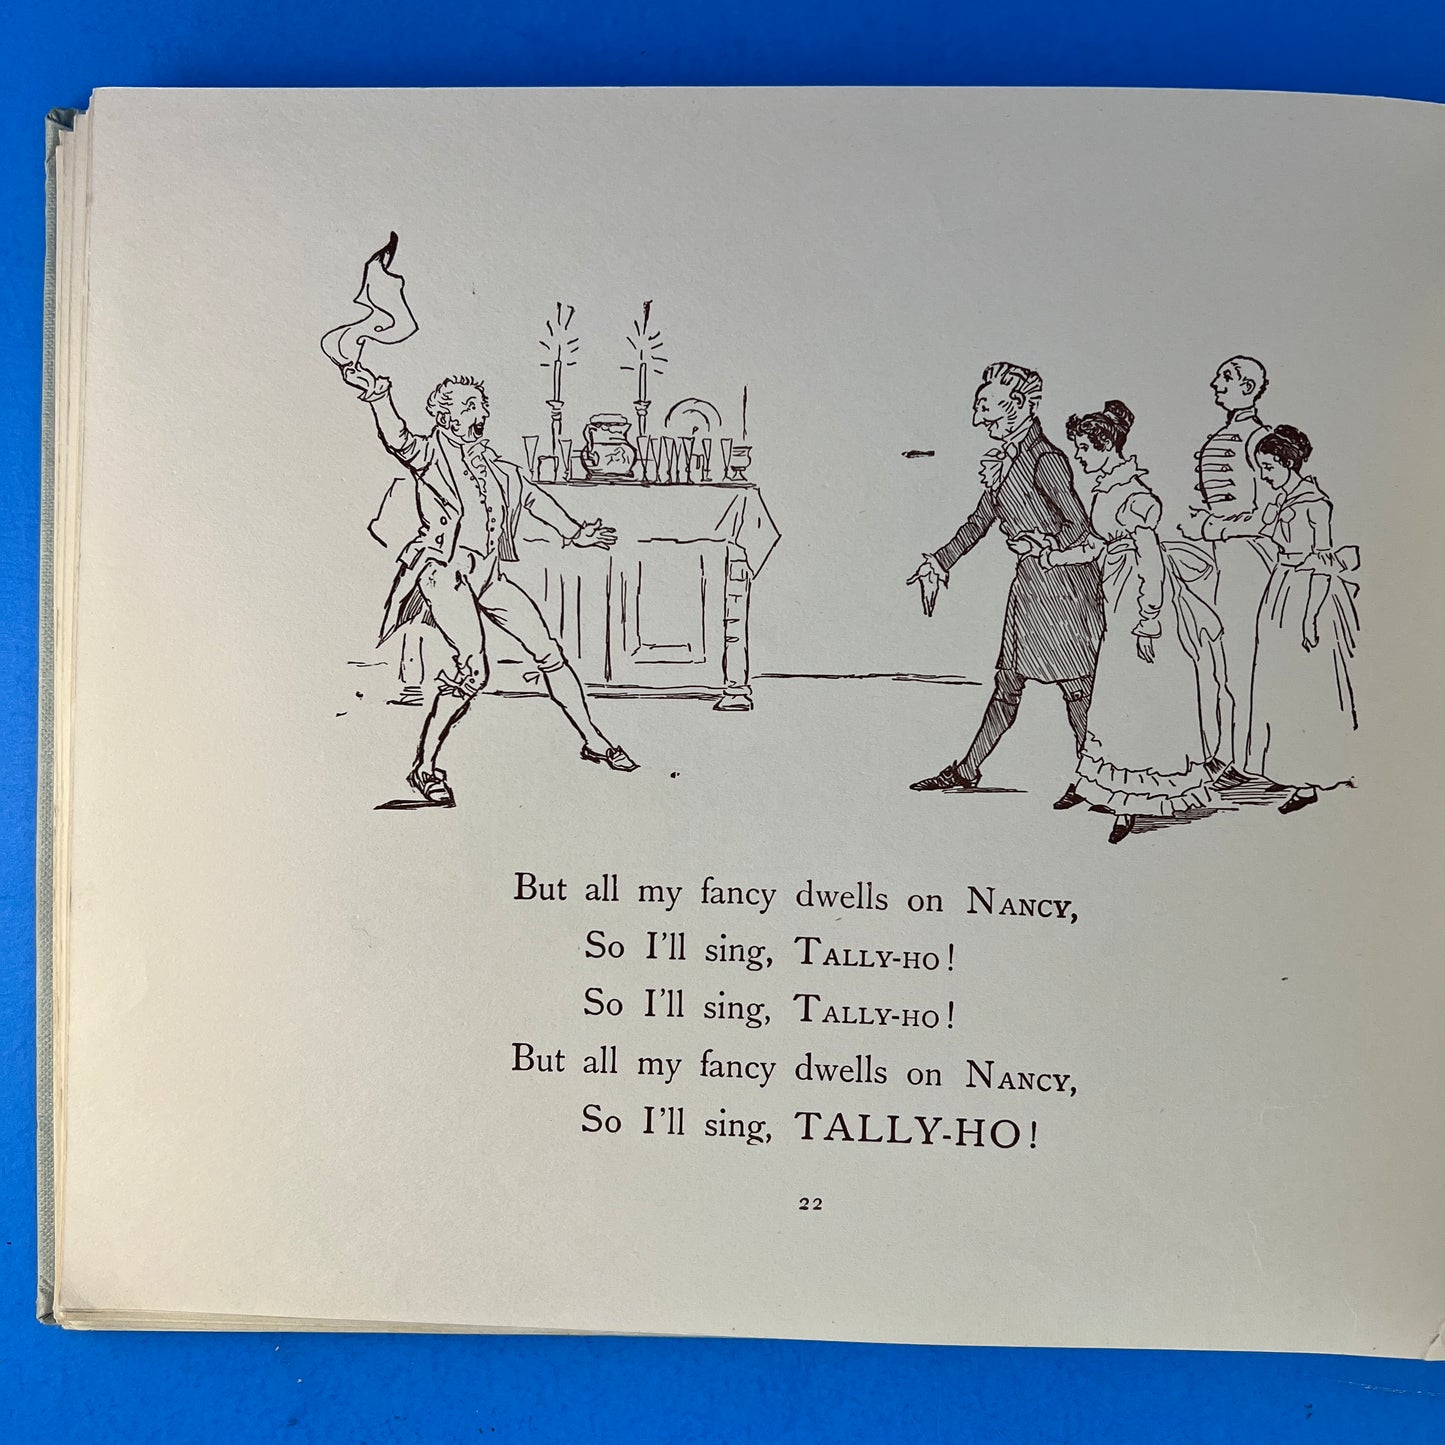 R. Caldecott's Second Collection of Pictures and Songs